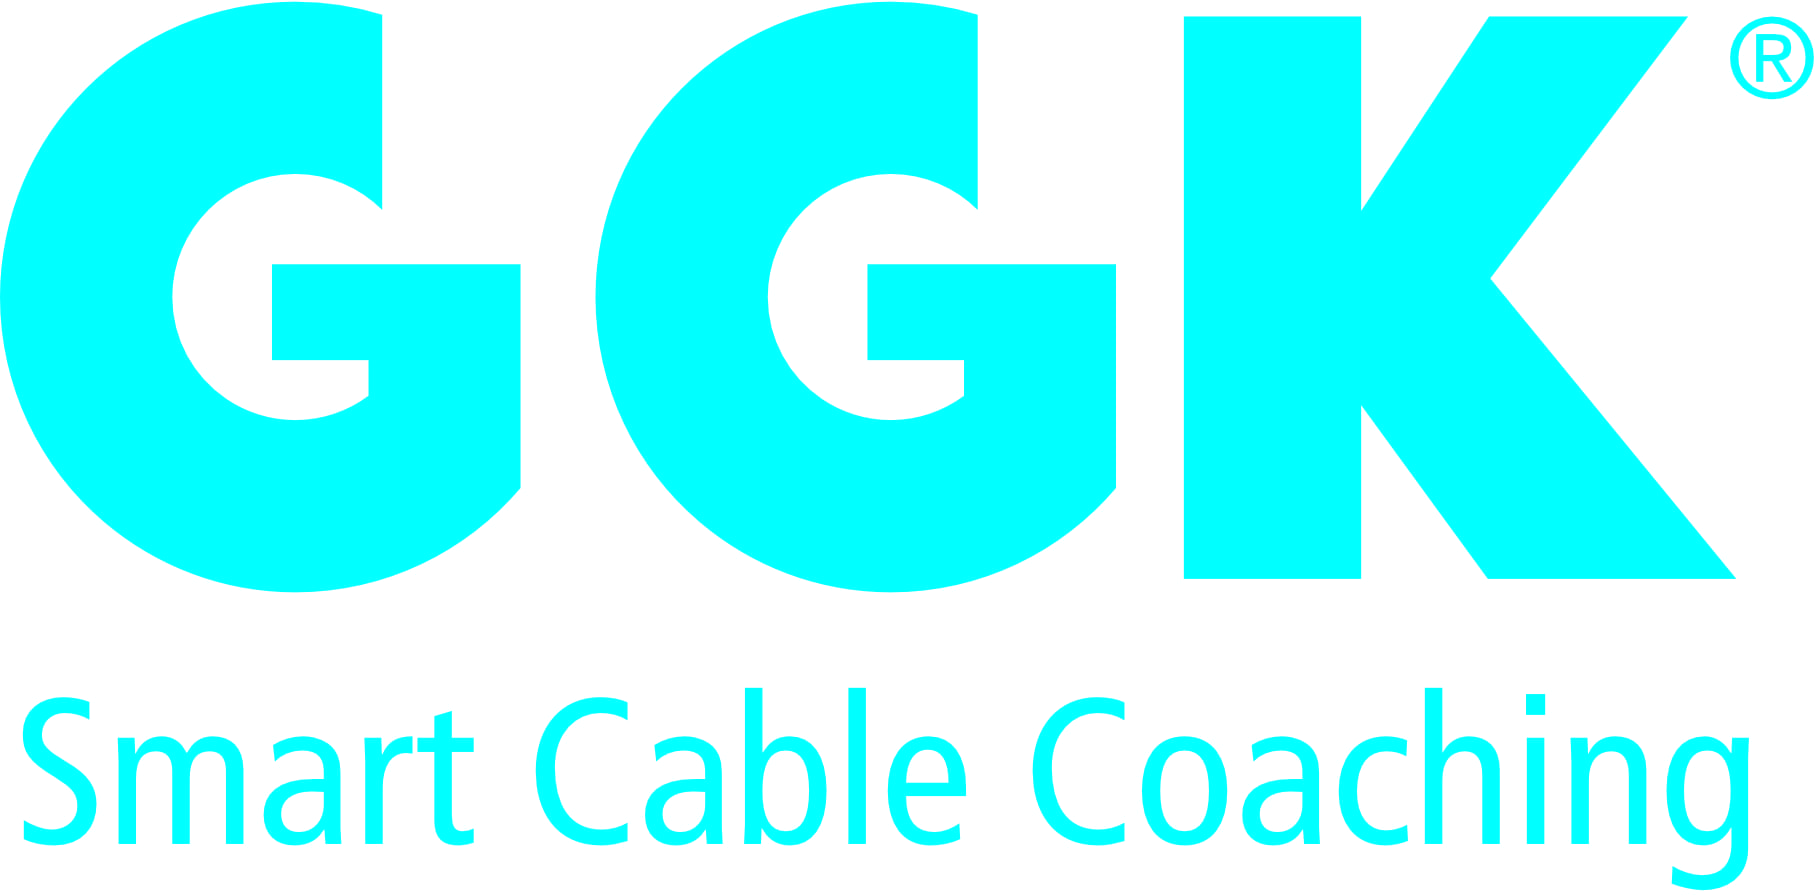 GGK Smart Cable Coaching